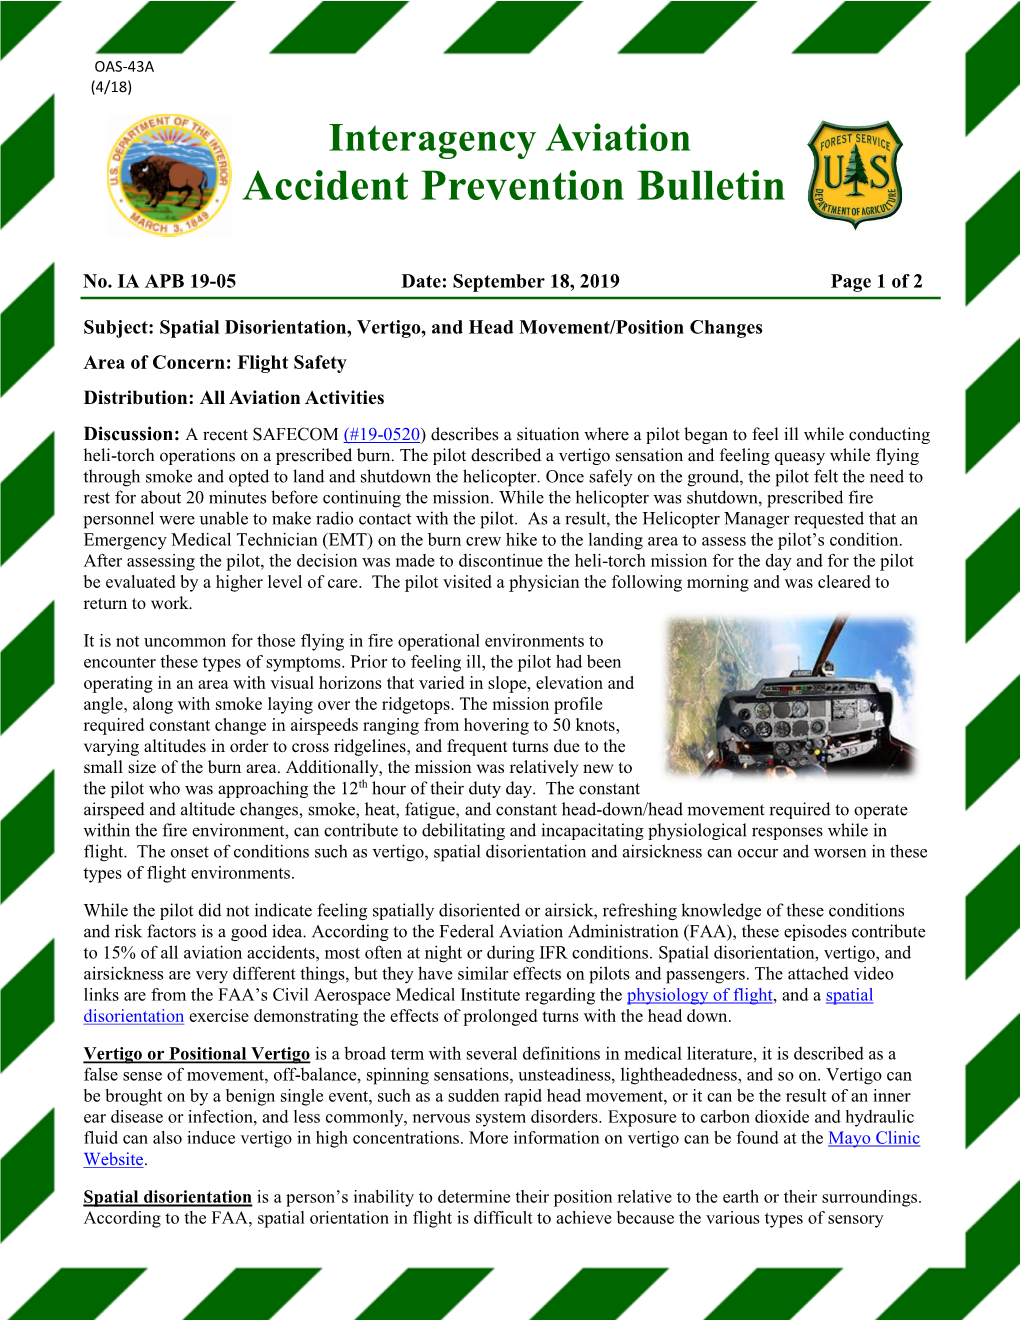 Interagency Aviation Accident Prevention Bulletin 19-05 Spatial